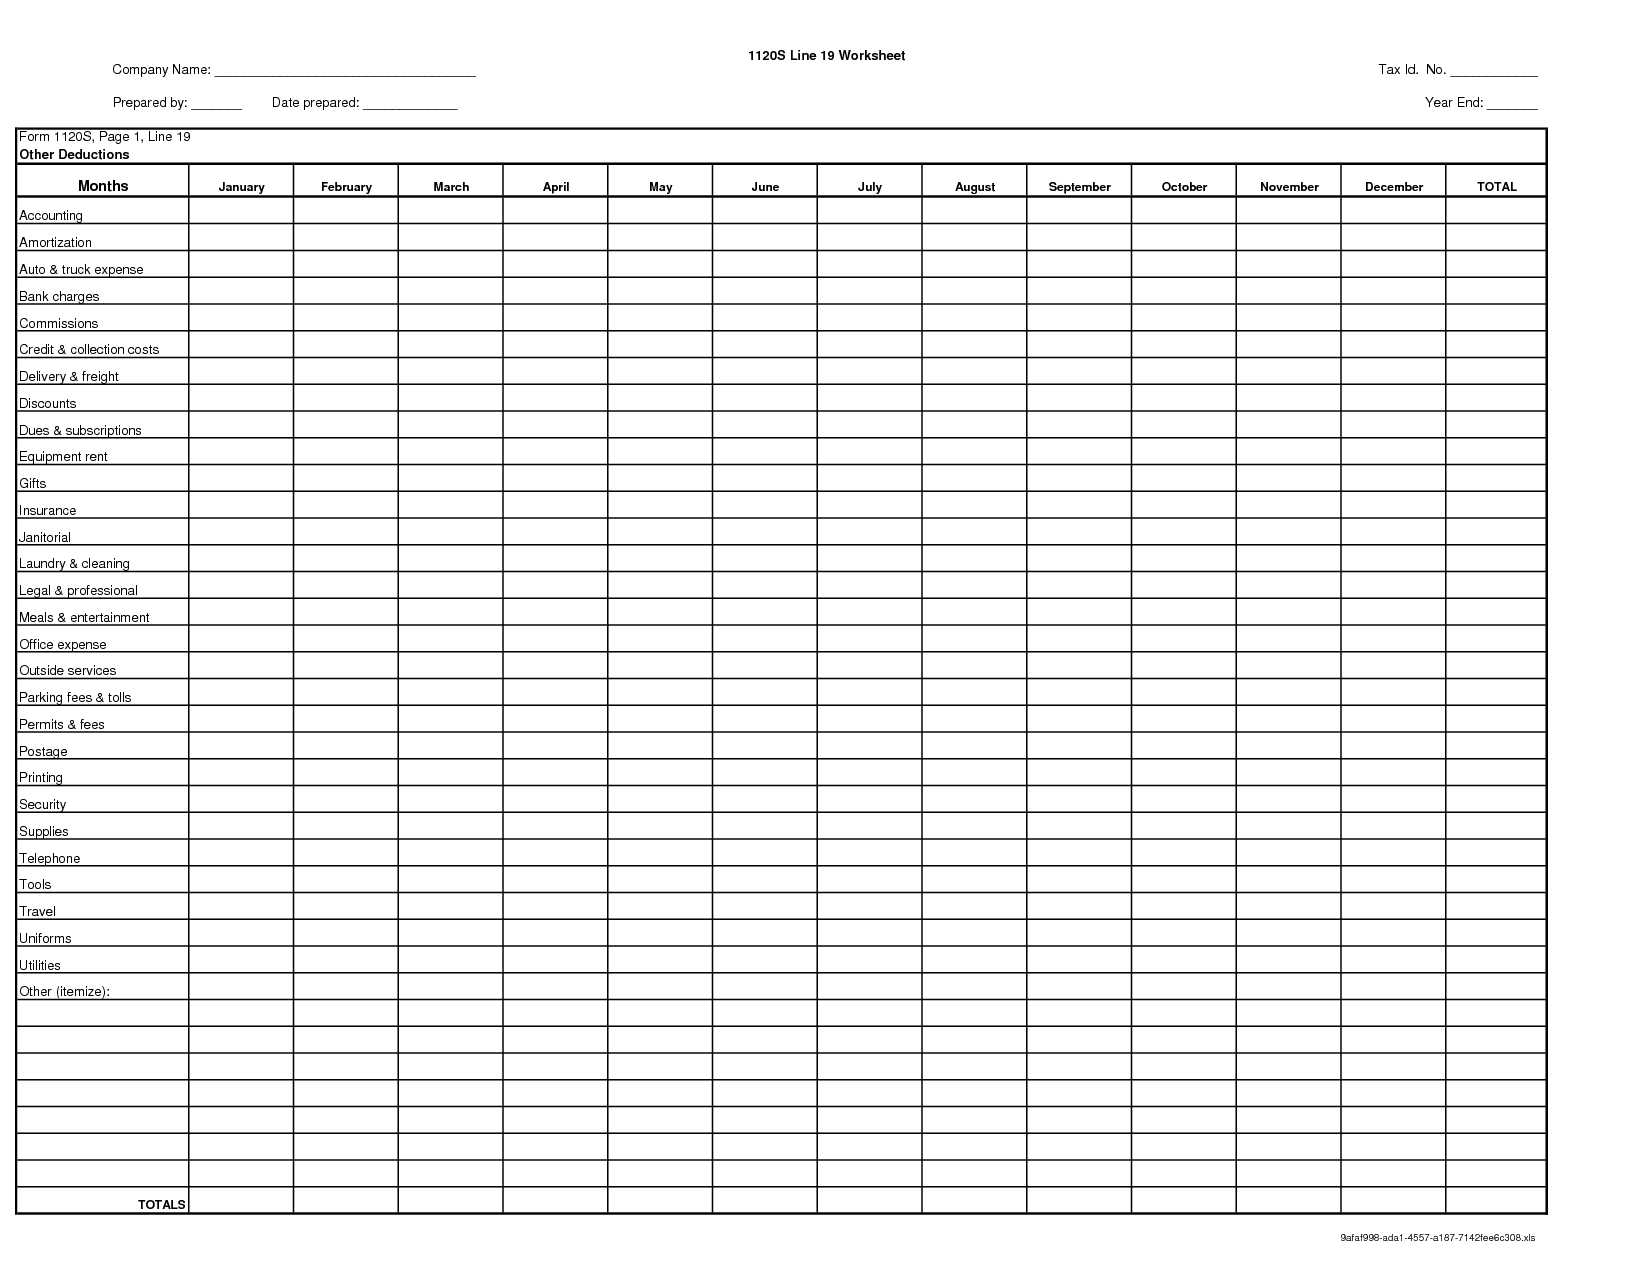 Tax organizer Worksheet for Small Business with Fine Home Fice Deduction form Collection Home Decorating